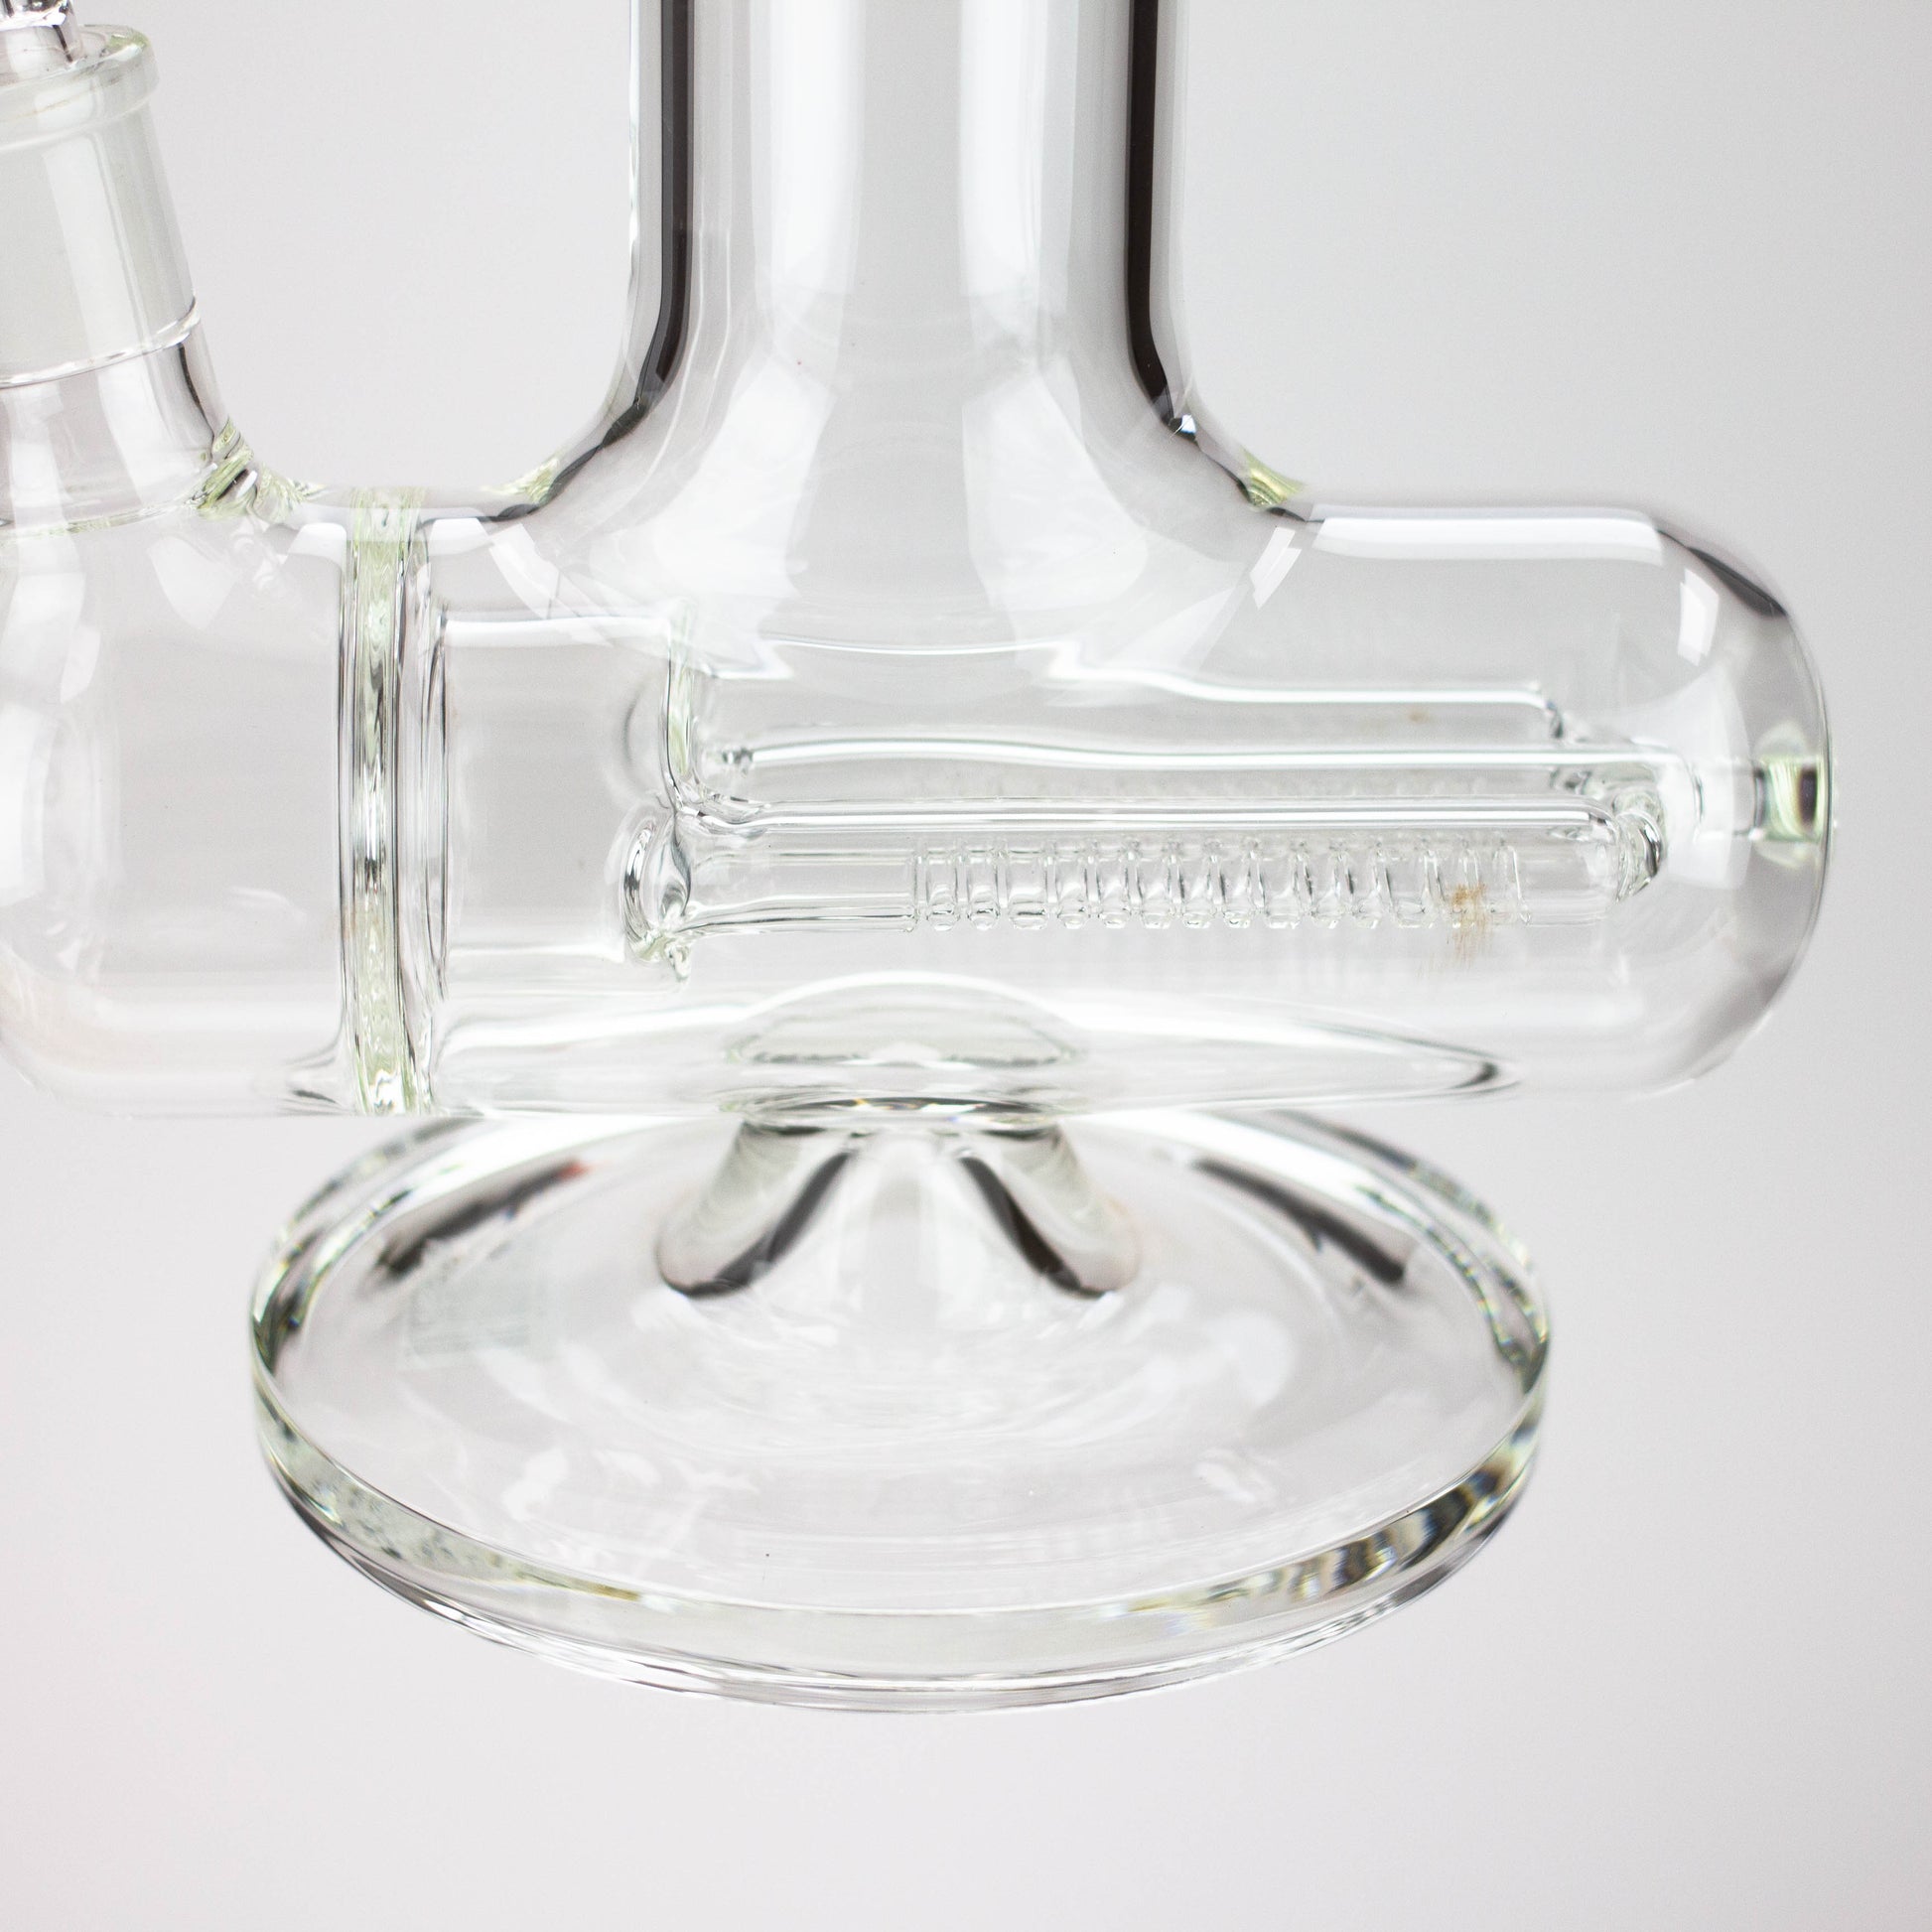 preemo - 20 inch Dome Over Triple Inline to Tree Perc [P015]_4